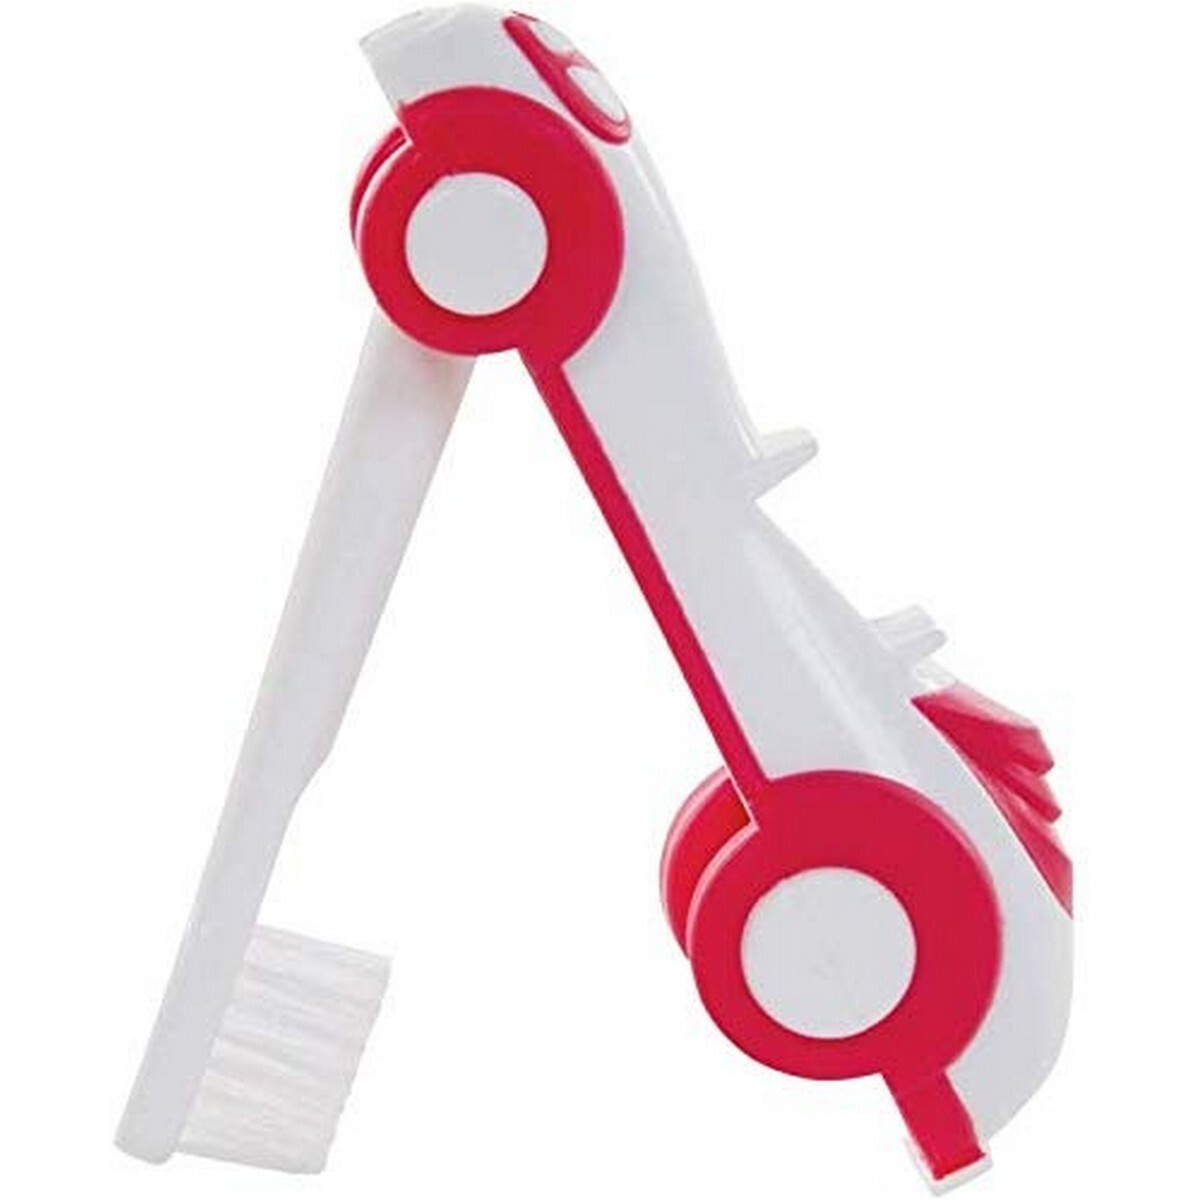 Mee Mee Baby Tooth Brush MM-3850A